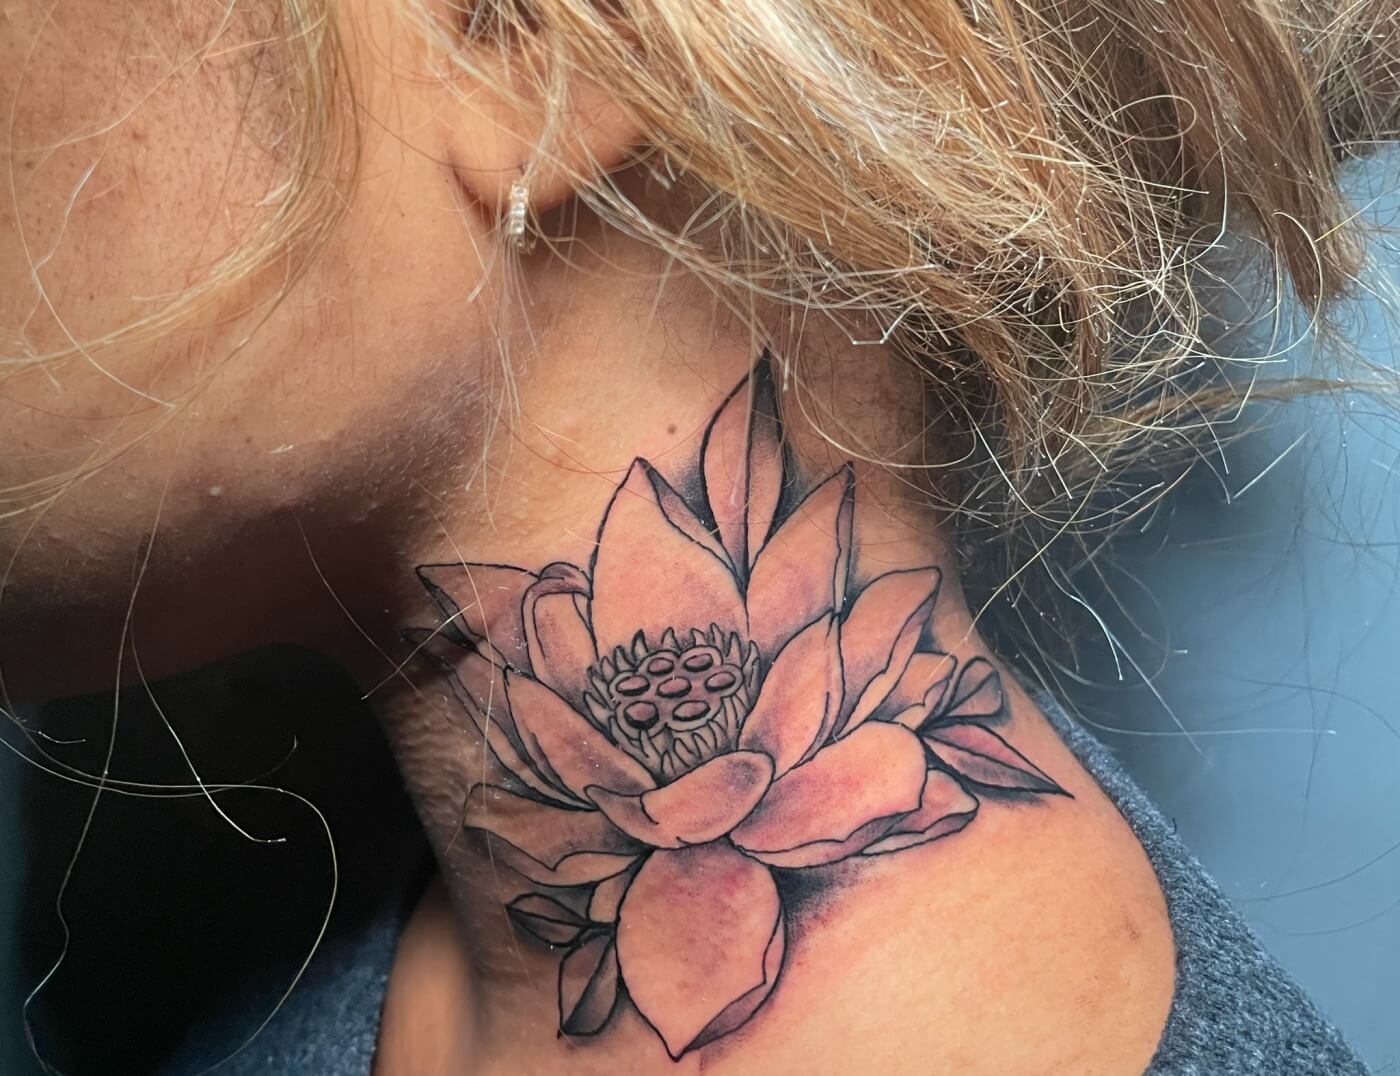 30 Amazing Lotus Flower Tattoo Ideas That Youll Love